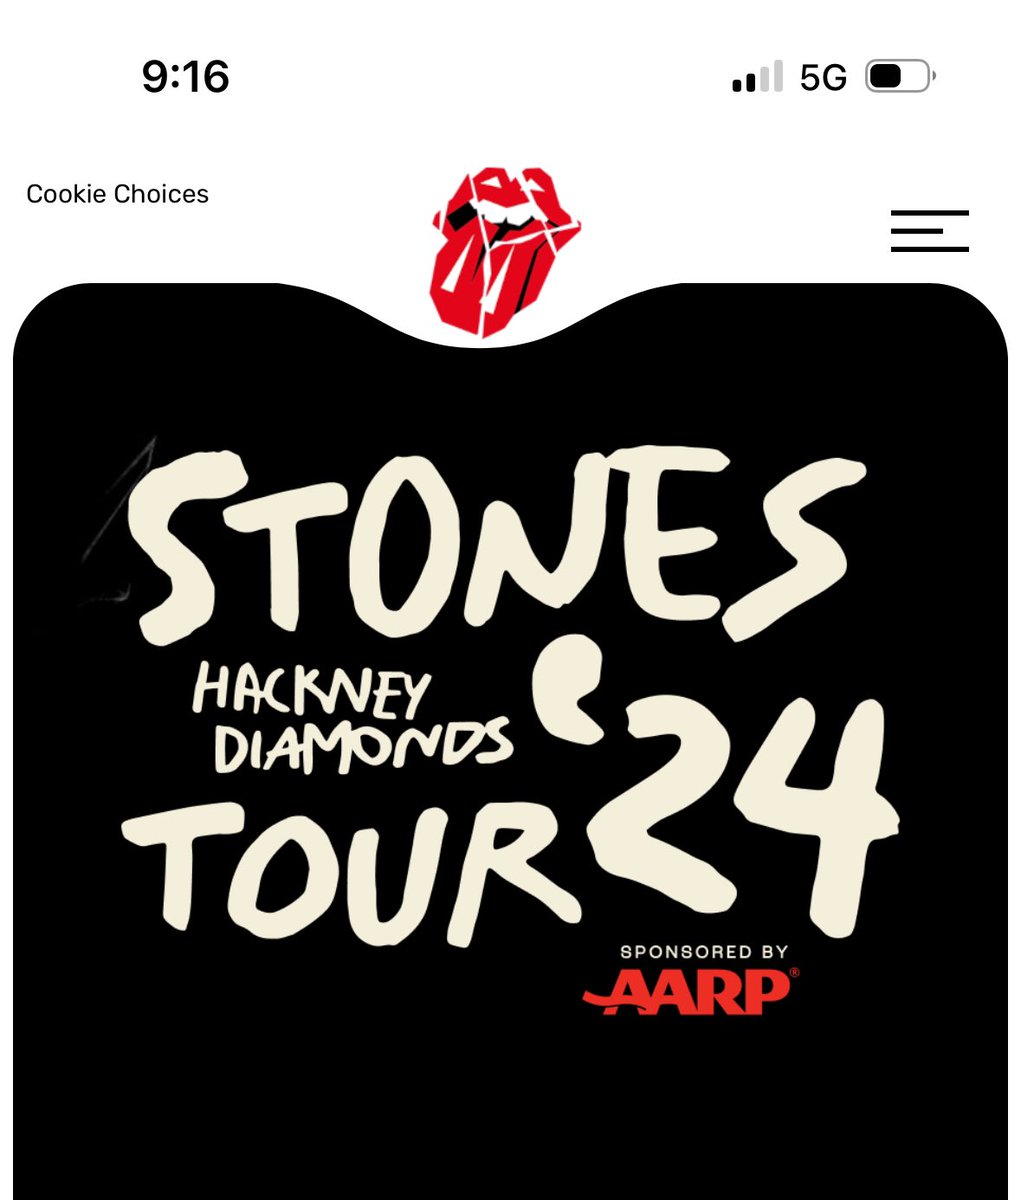 I’m really hoping to go see @RollingStones in May, but guys this is not what an apostrophe looks like! #typography #typofail